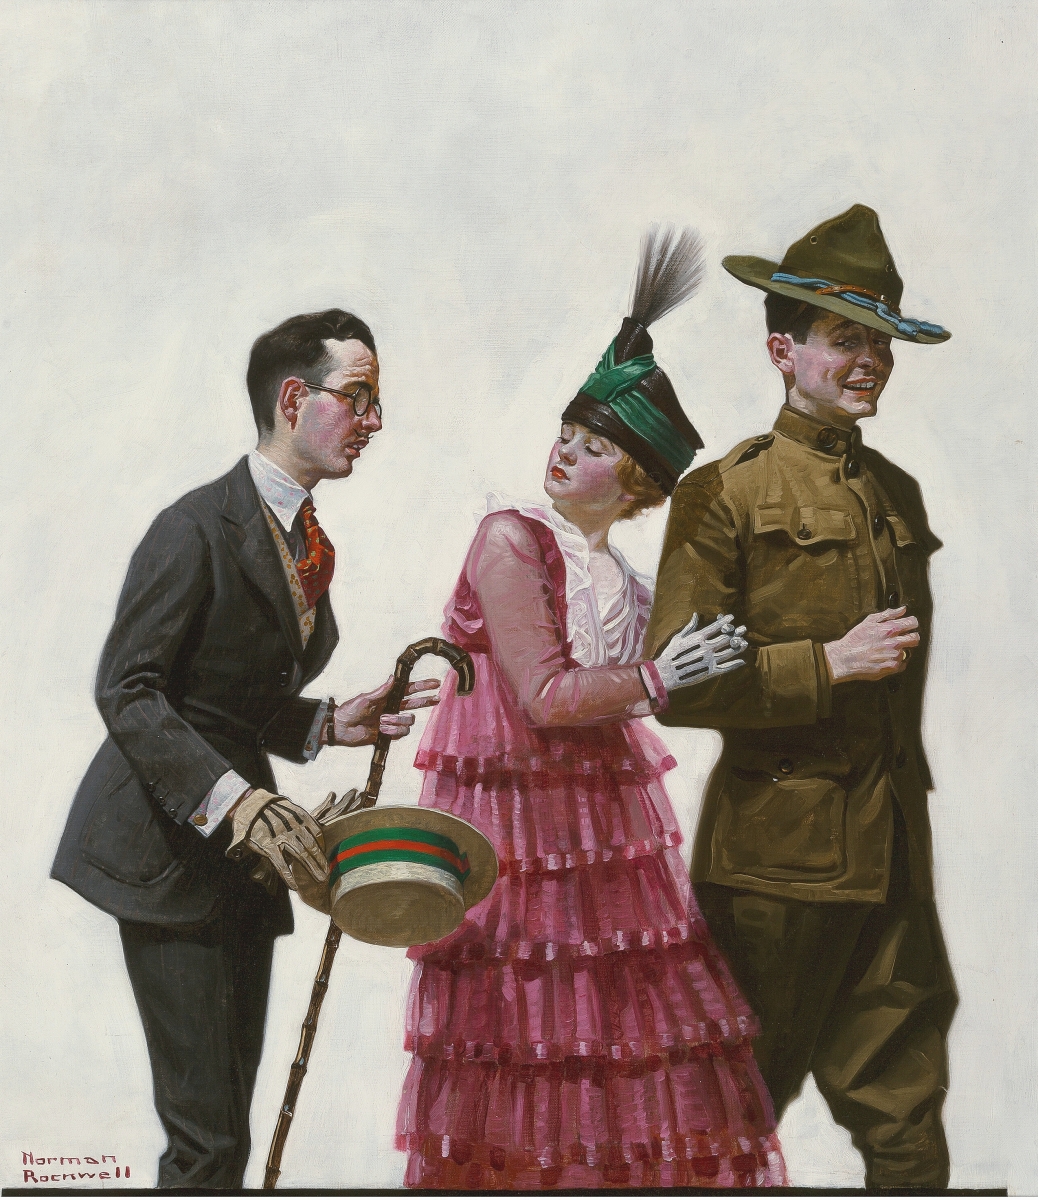 “Rockwell only did a few covers for Judge magazine;  he is the most famous and now the record holder of a Judge cover ”, commented Aviva Lehmann of“ Excuse me!  (Soldier Escorting Woman) ”by Norman Rockwell, which saw competition from three bidders and sold for $ 543,000 ($ 400 / 600,000).